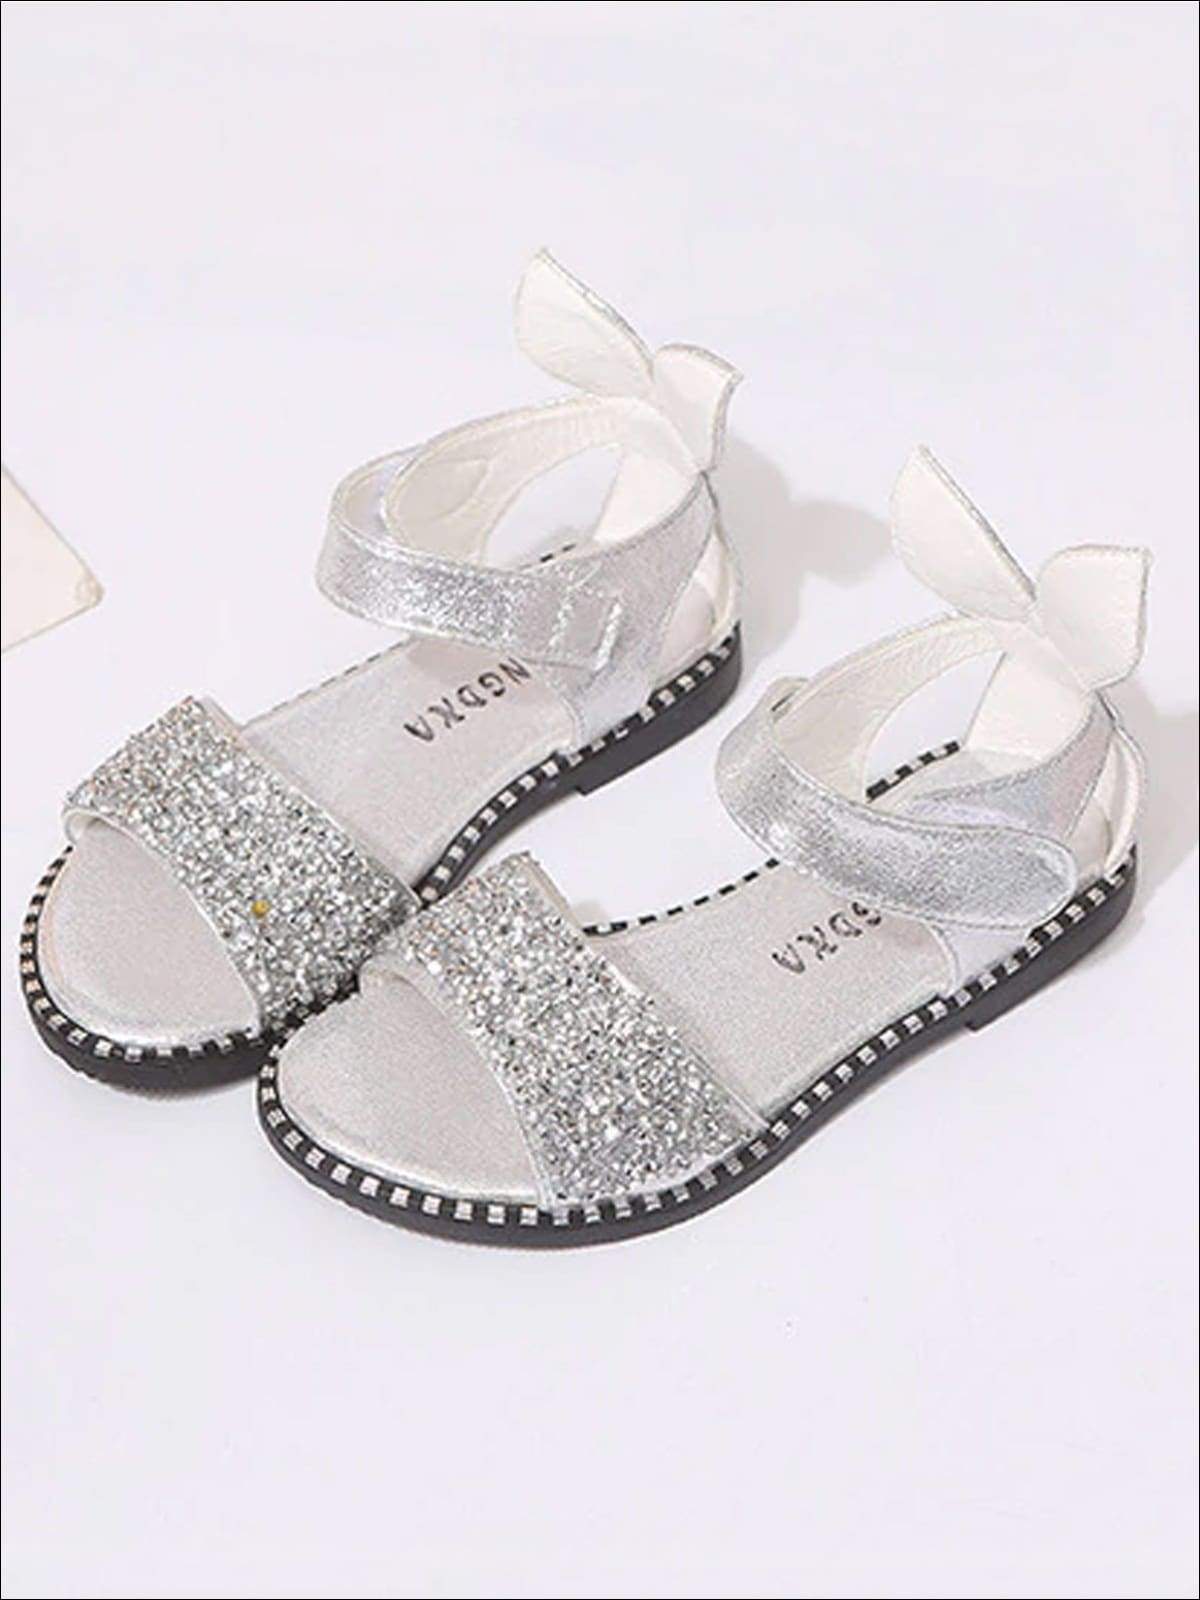 Mia Belle Girls Glitter Bunny Ear Sandals | Shoes By Liv and Mia